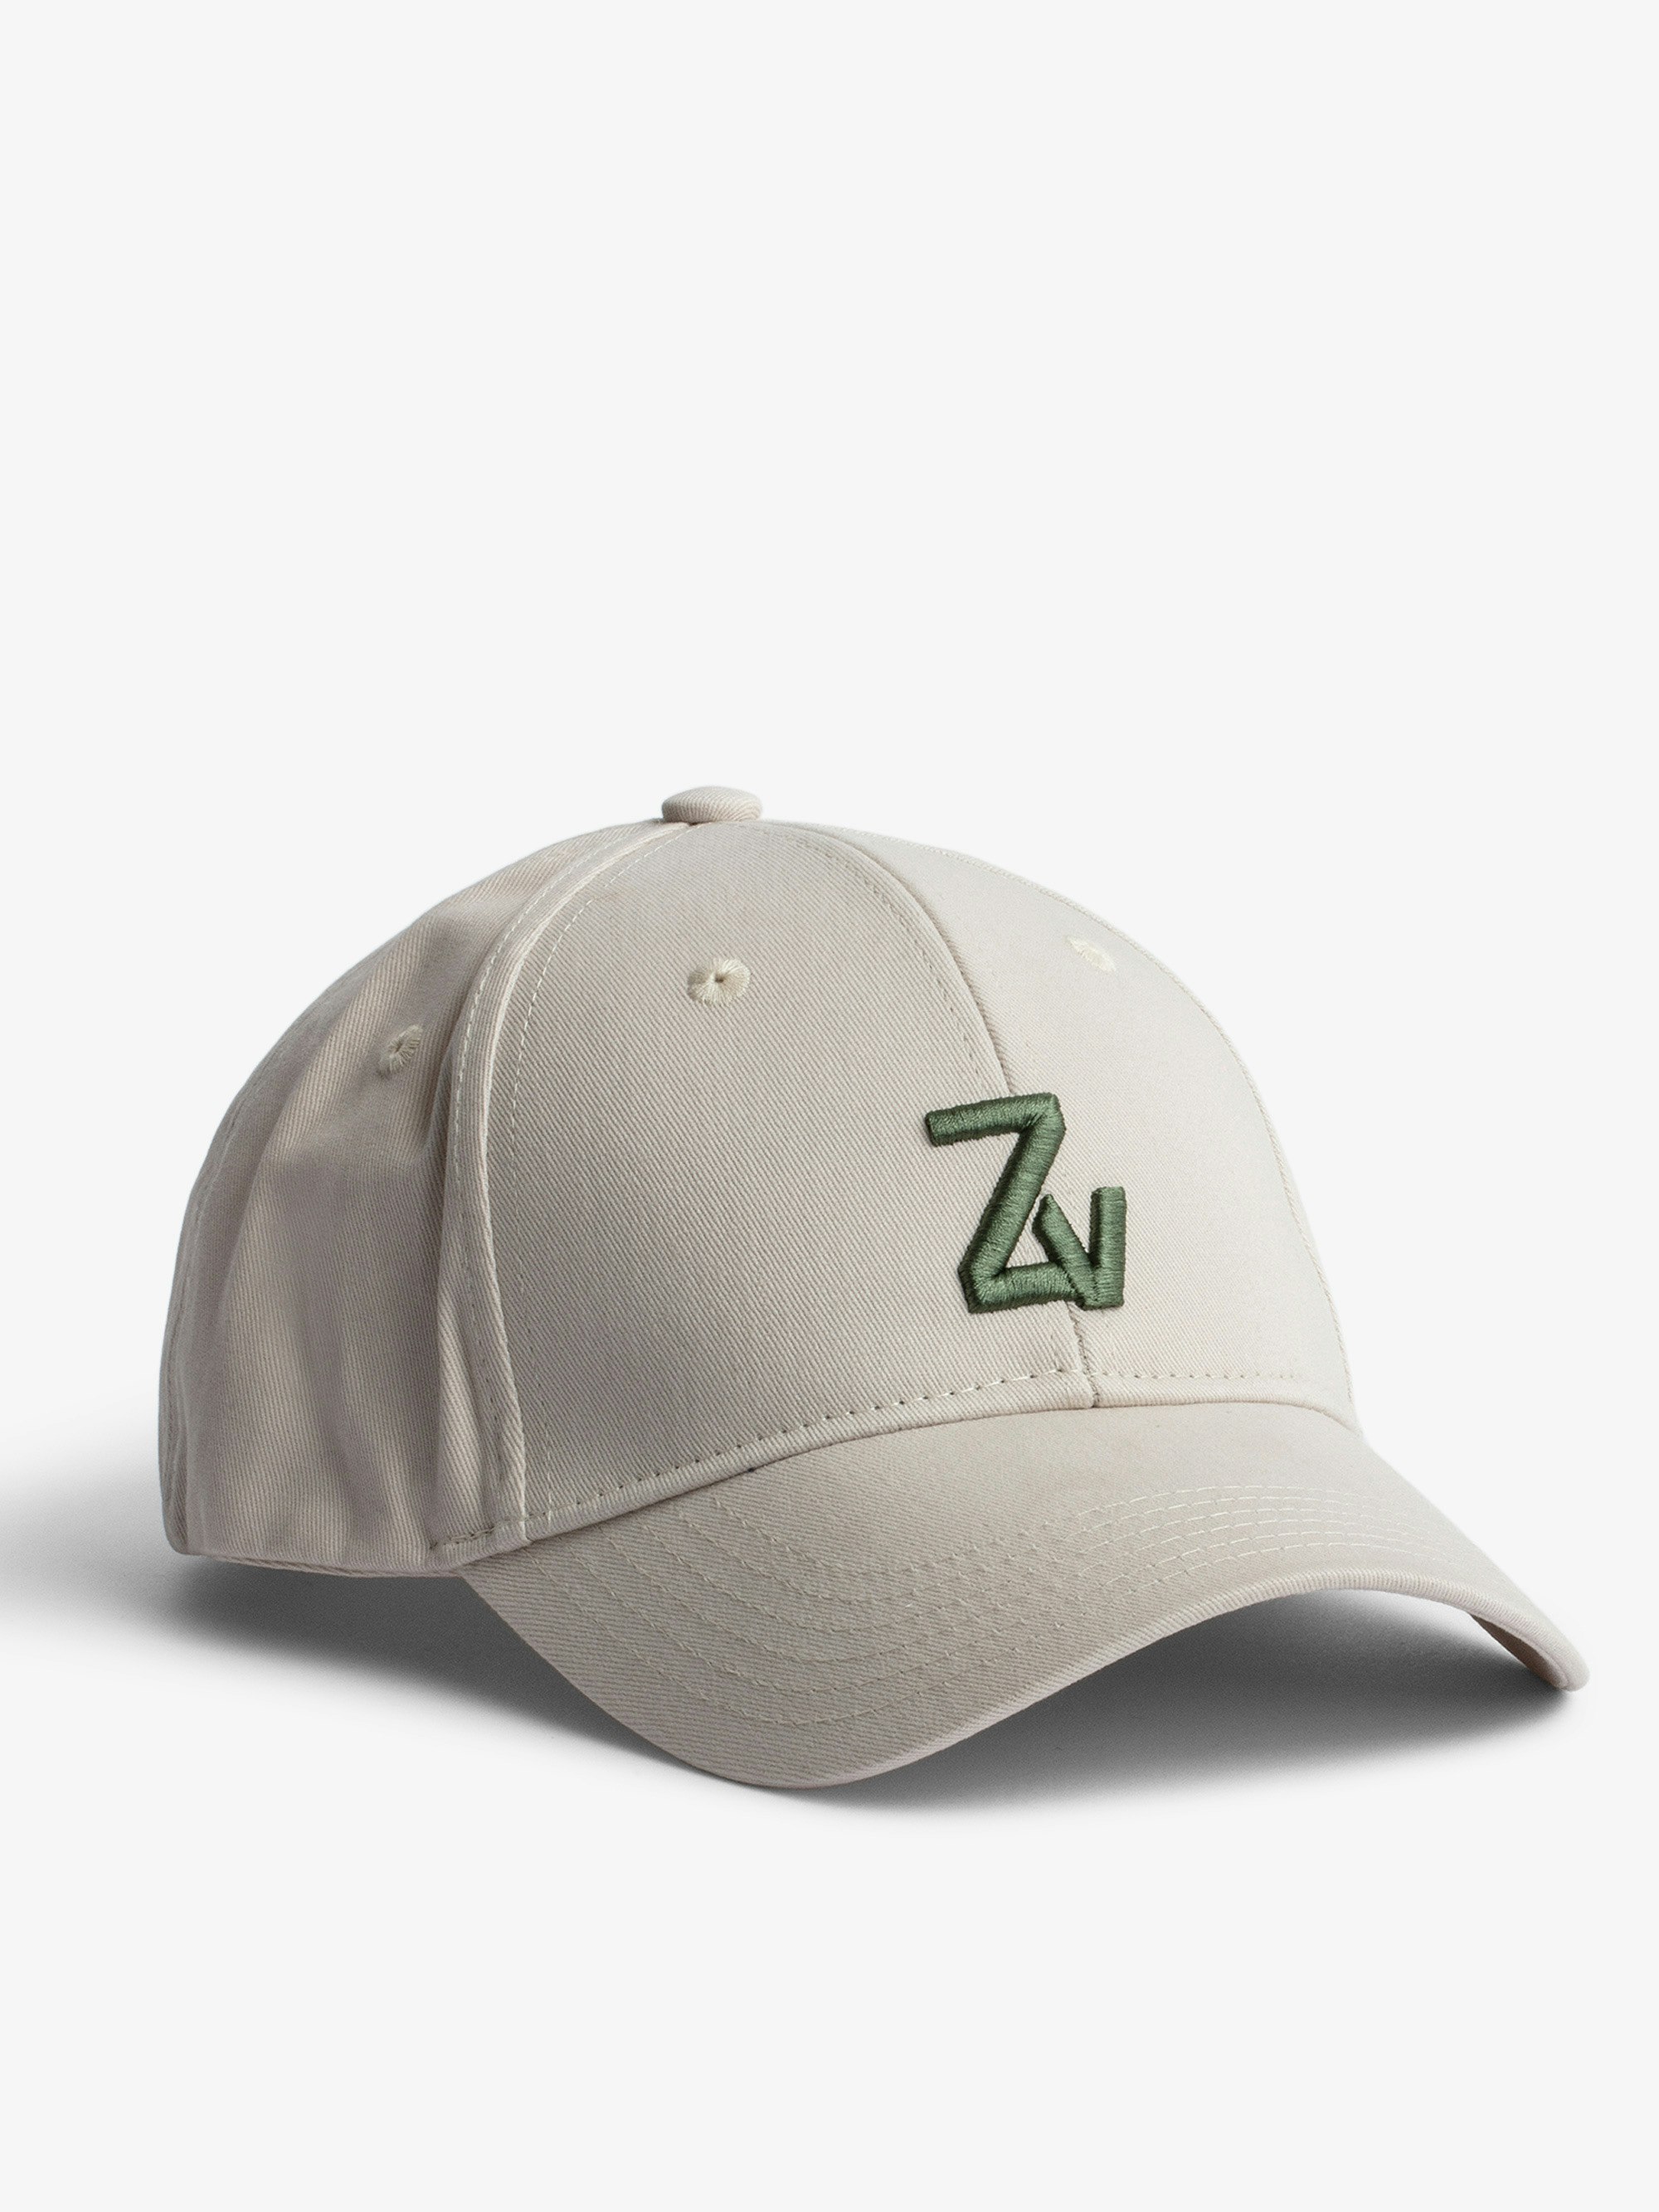 ZV Initiale Klelia Cap - Cotton cap embroidered with the ZV initials.